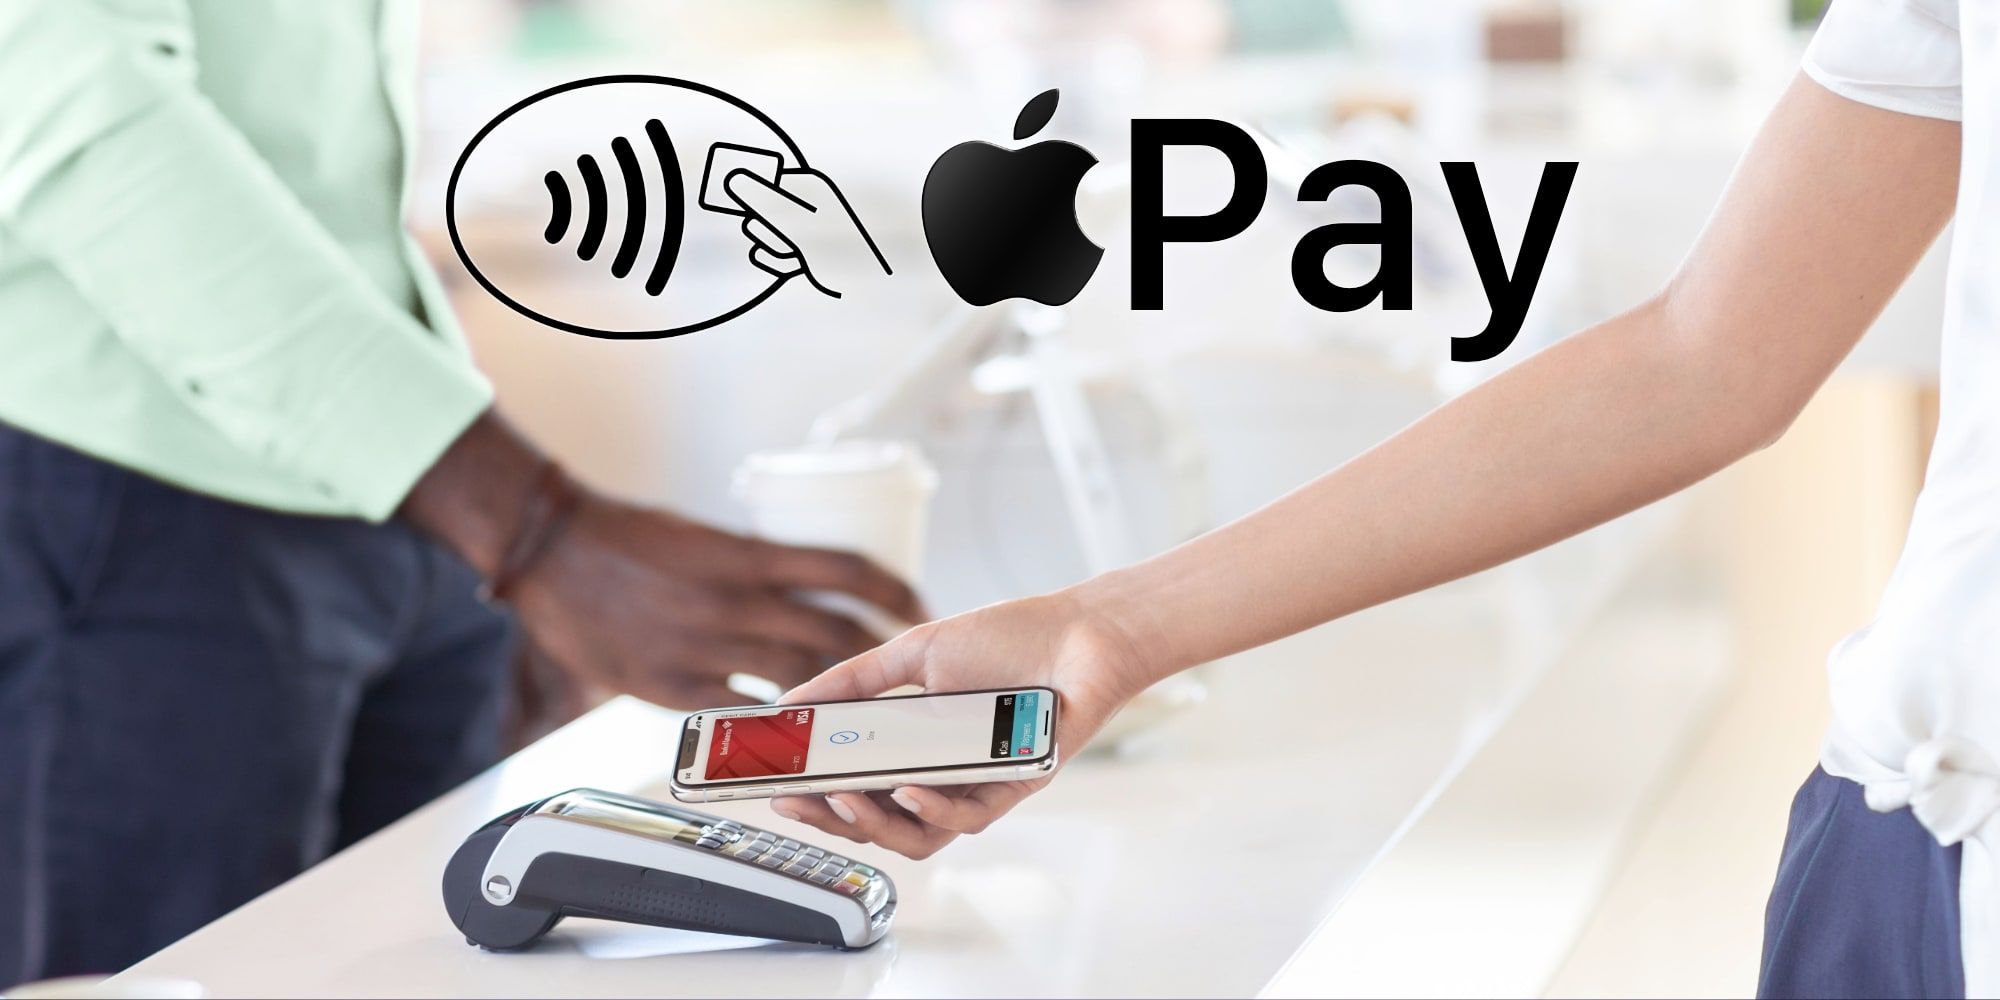 Apple Pay On iPhone 12 Getting Started & How To Use